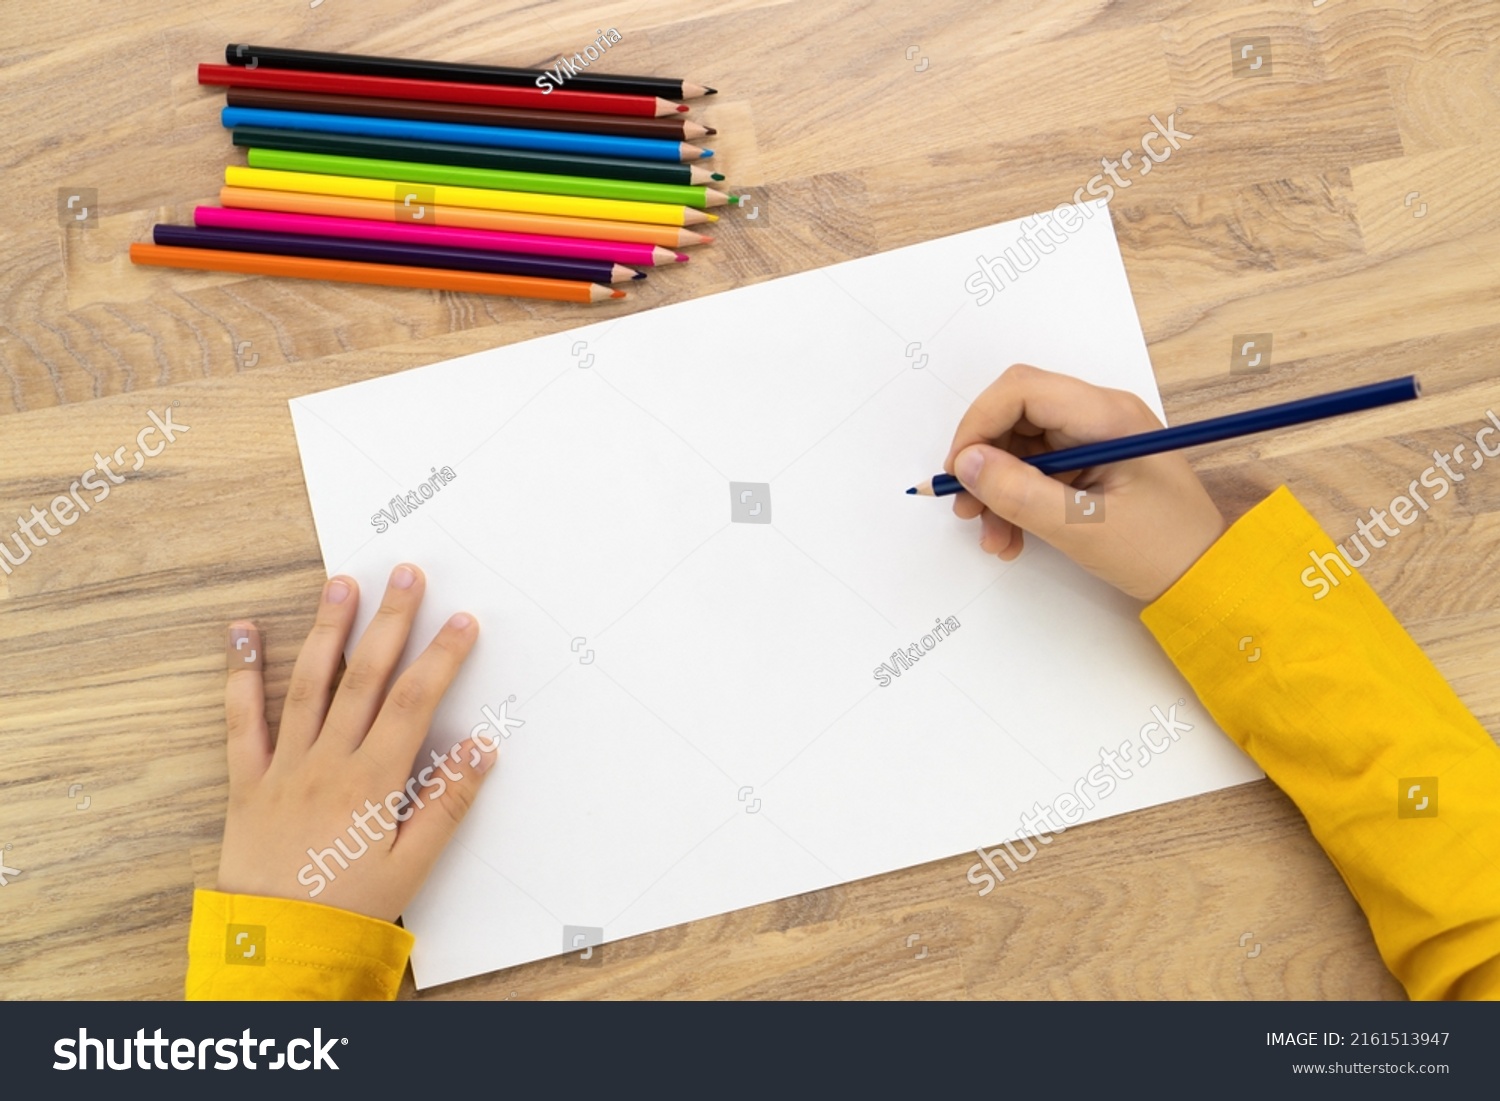 Child hands drawing with pencil on white paper, top view. Kids painting mock up. #2161513947